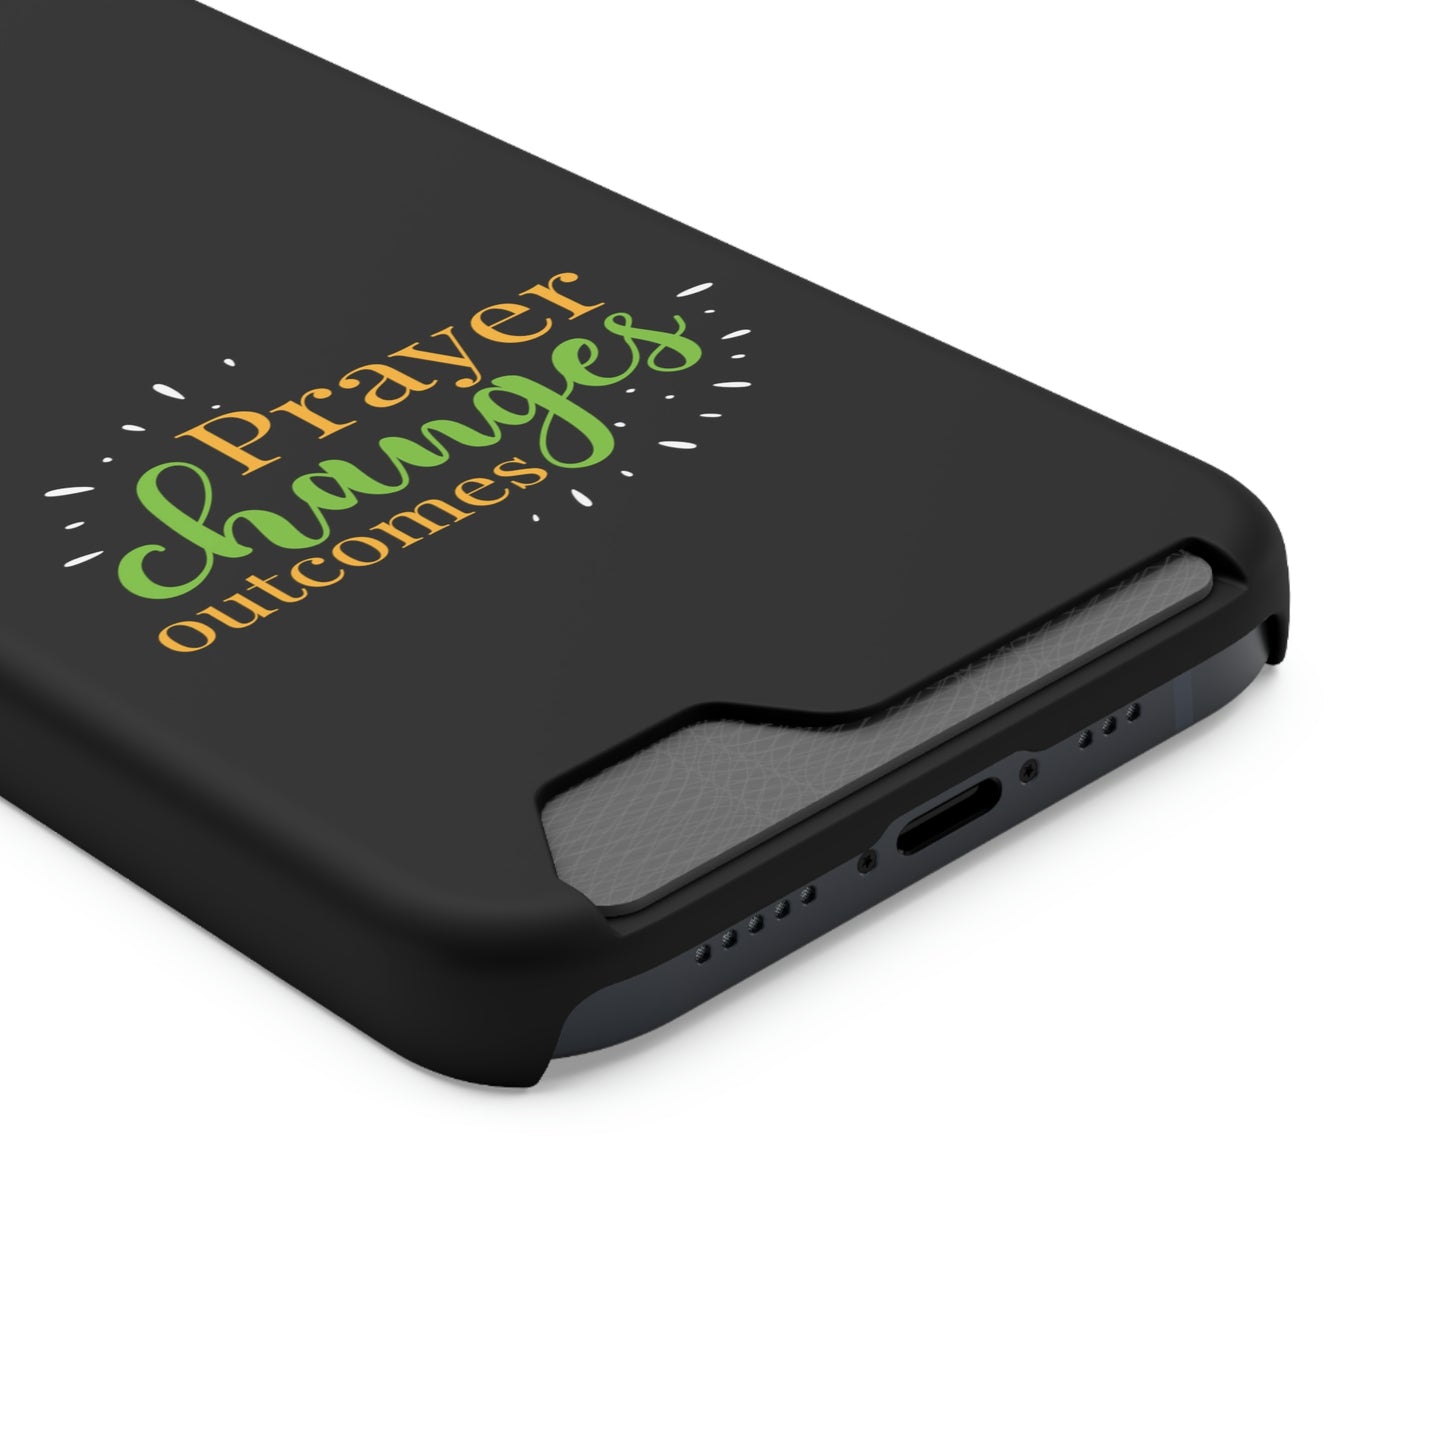 Prayer Changes Outcomes Phone Case With Card Holder